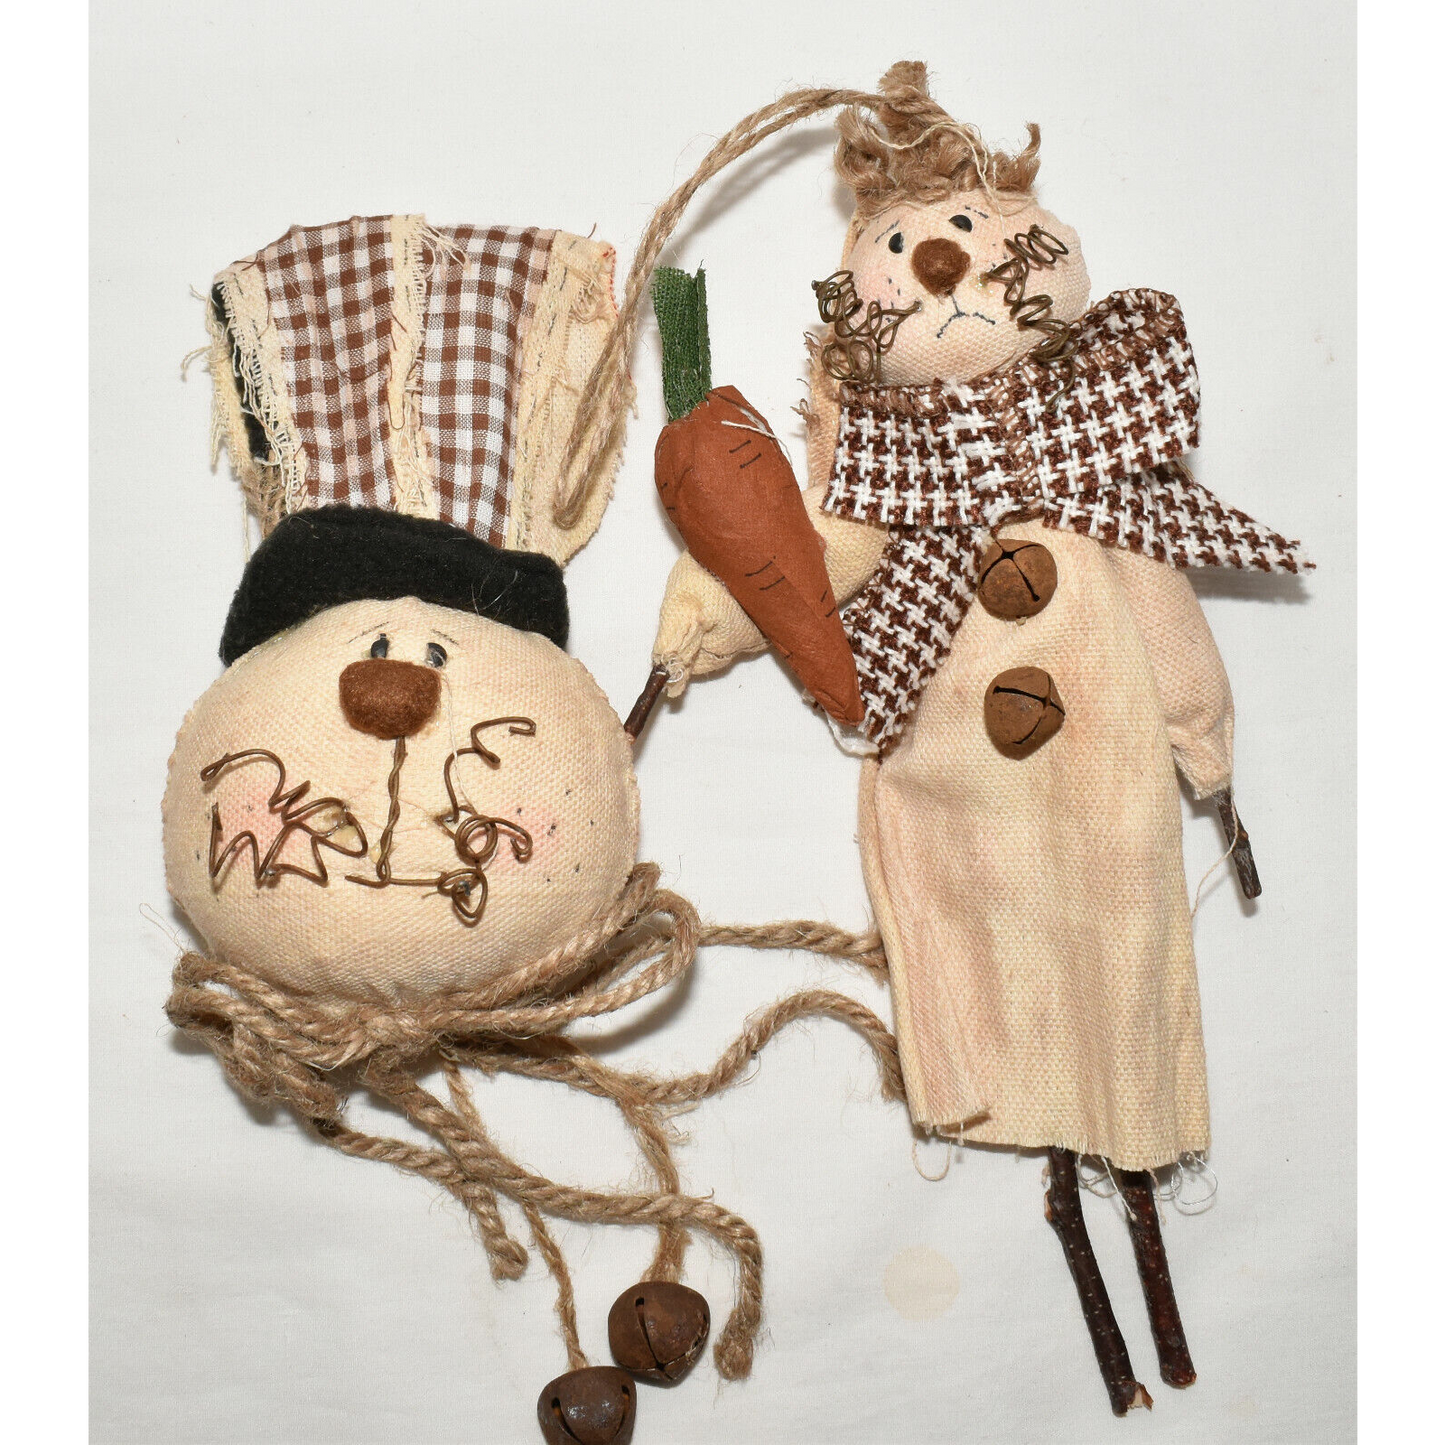 2 Handmade Easter Bunny Dolls Ornaments Easter Decor Cloth Wire Wood Twine New